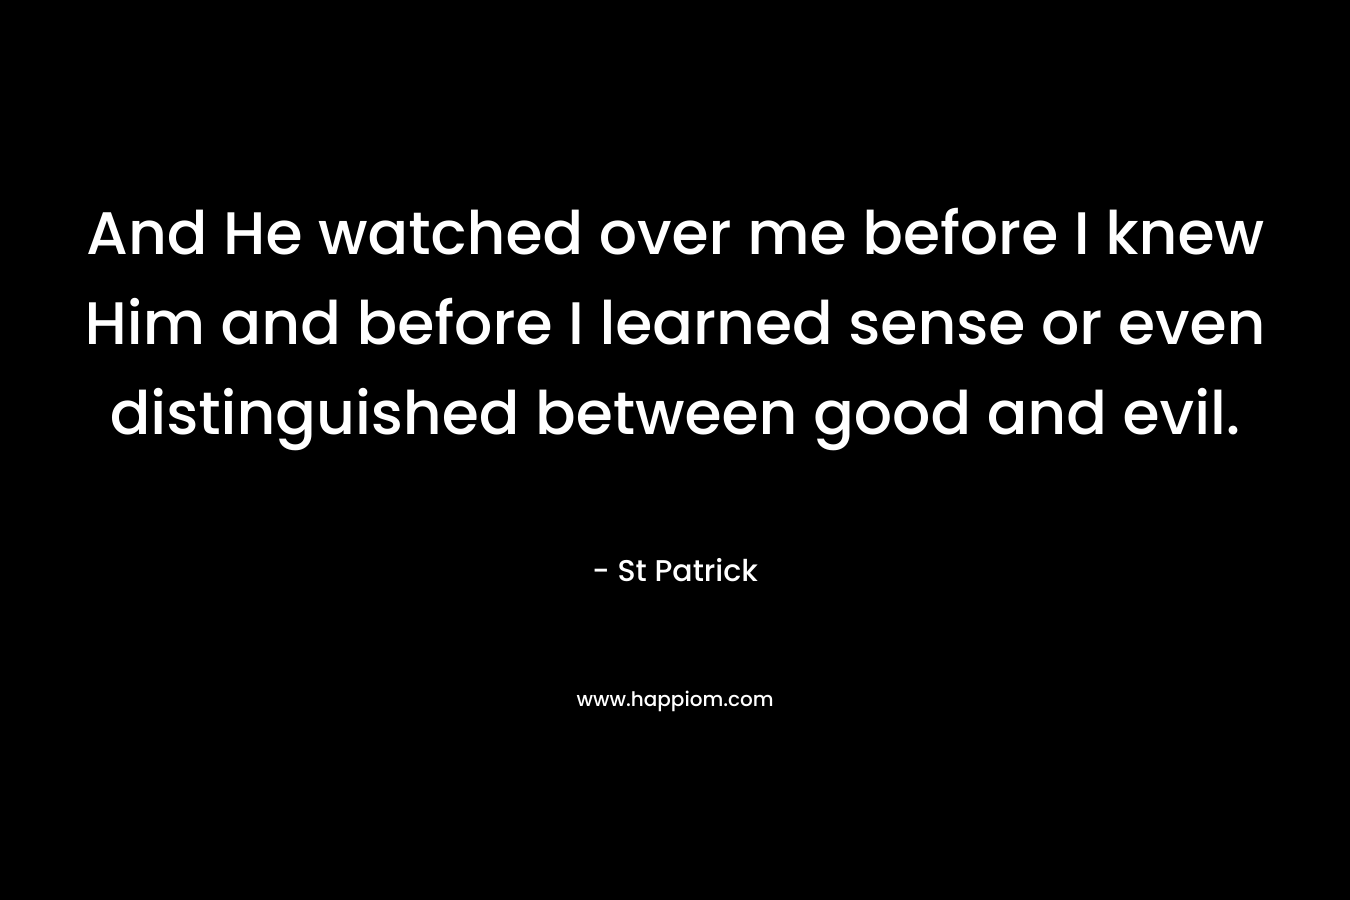 And He watched over me before I knew Him and before I learned sense or even distinguished between good and evil. – St Patrick